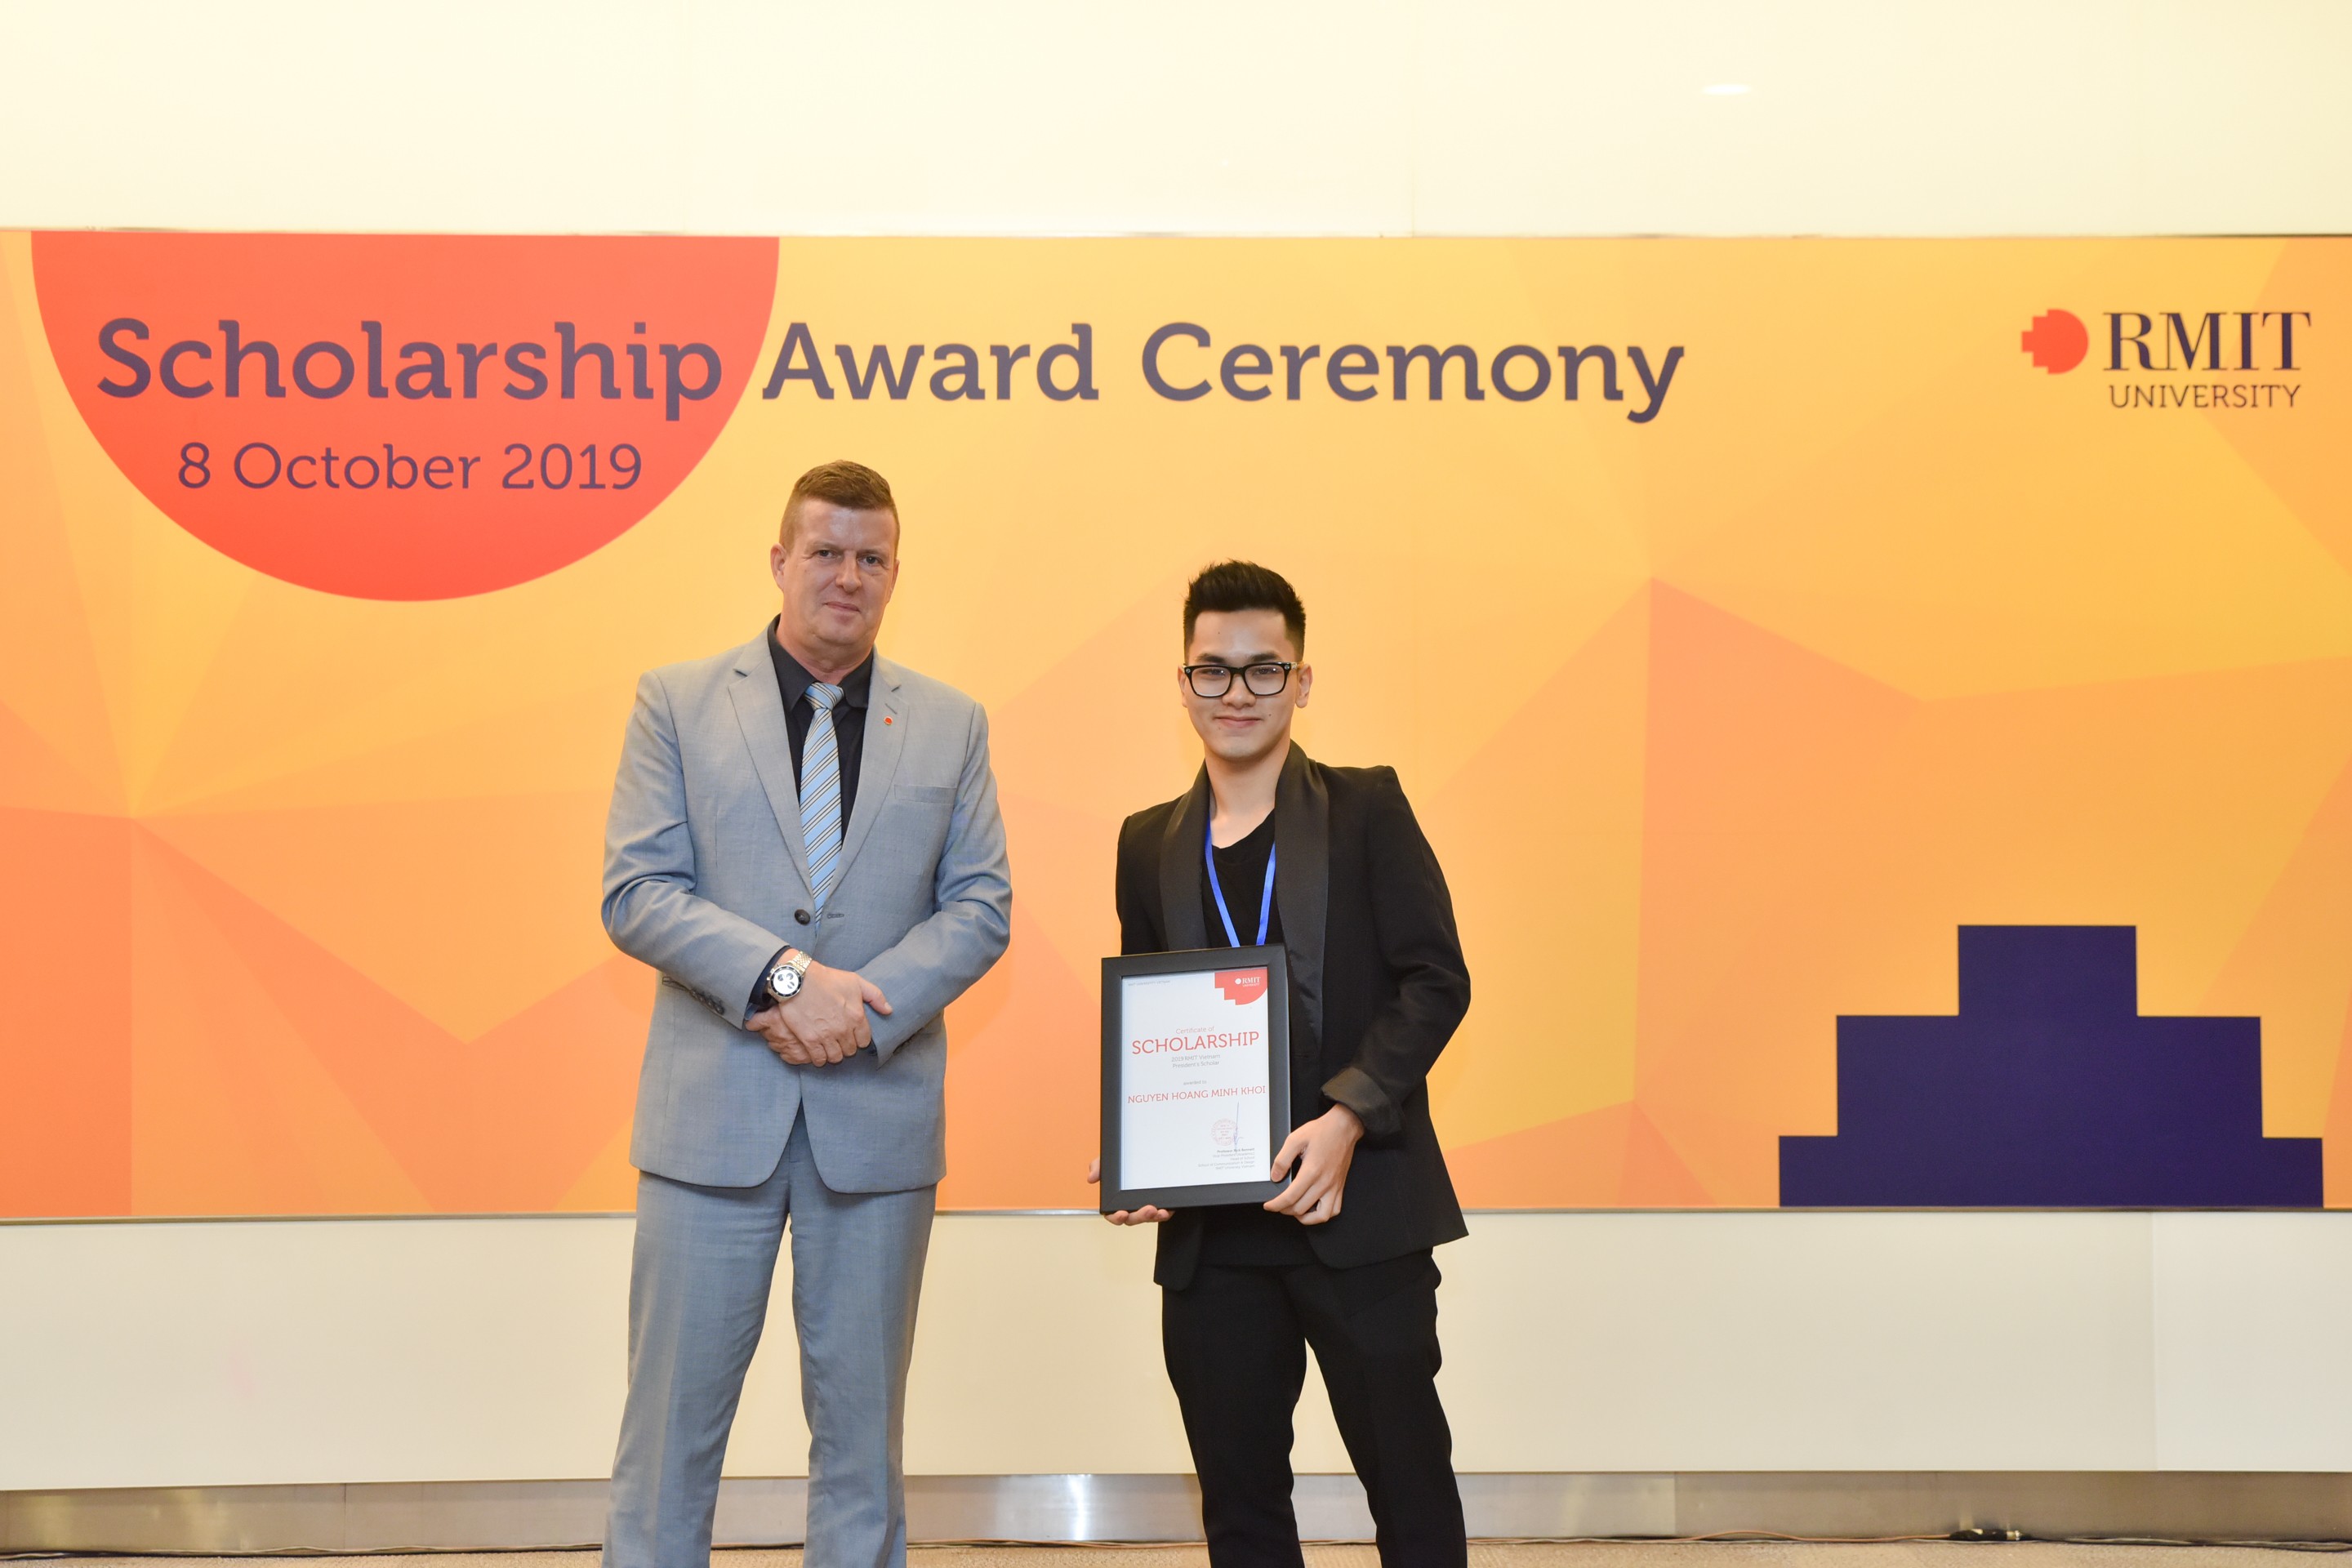 Nguyen Hoang Minh Khoi received the President’s Scholarship from Vice-President Academic and Head of School of Communication & Design, Professor Rick Bennett at the RMIT Scholarship Award Ceremony.  